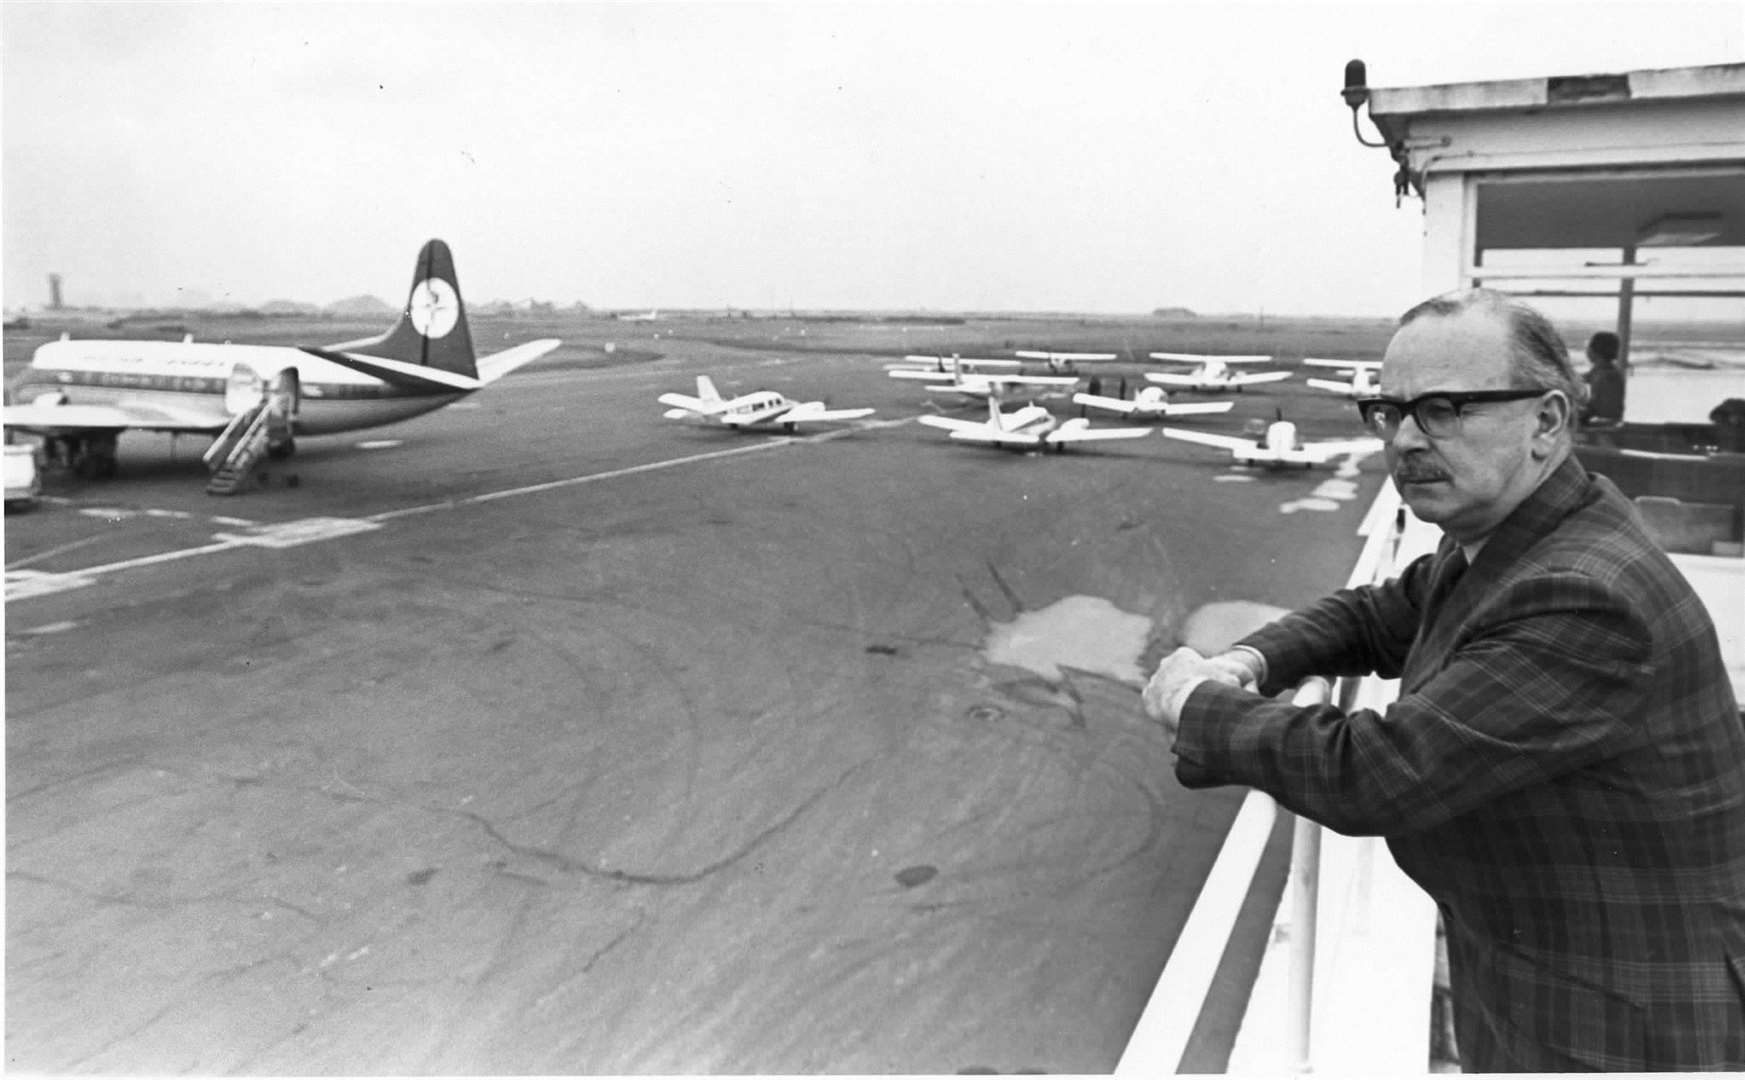 The manager of Lydd Airport looking out over the runway in February 1978